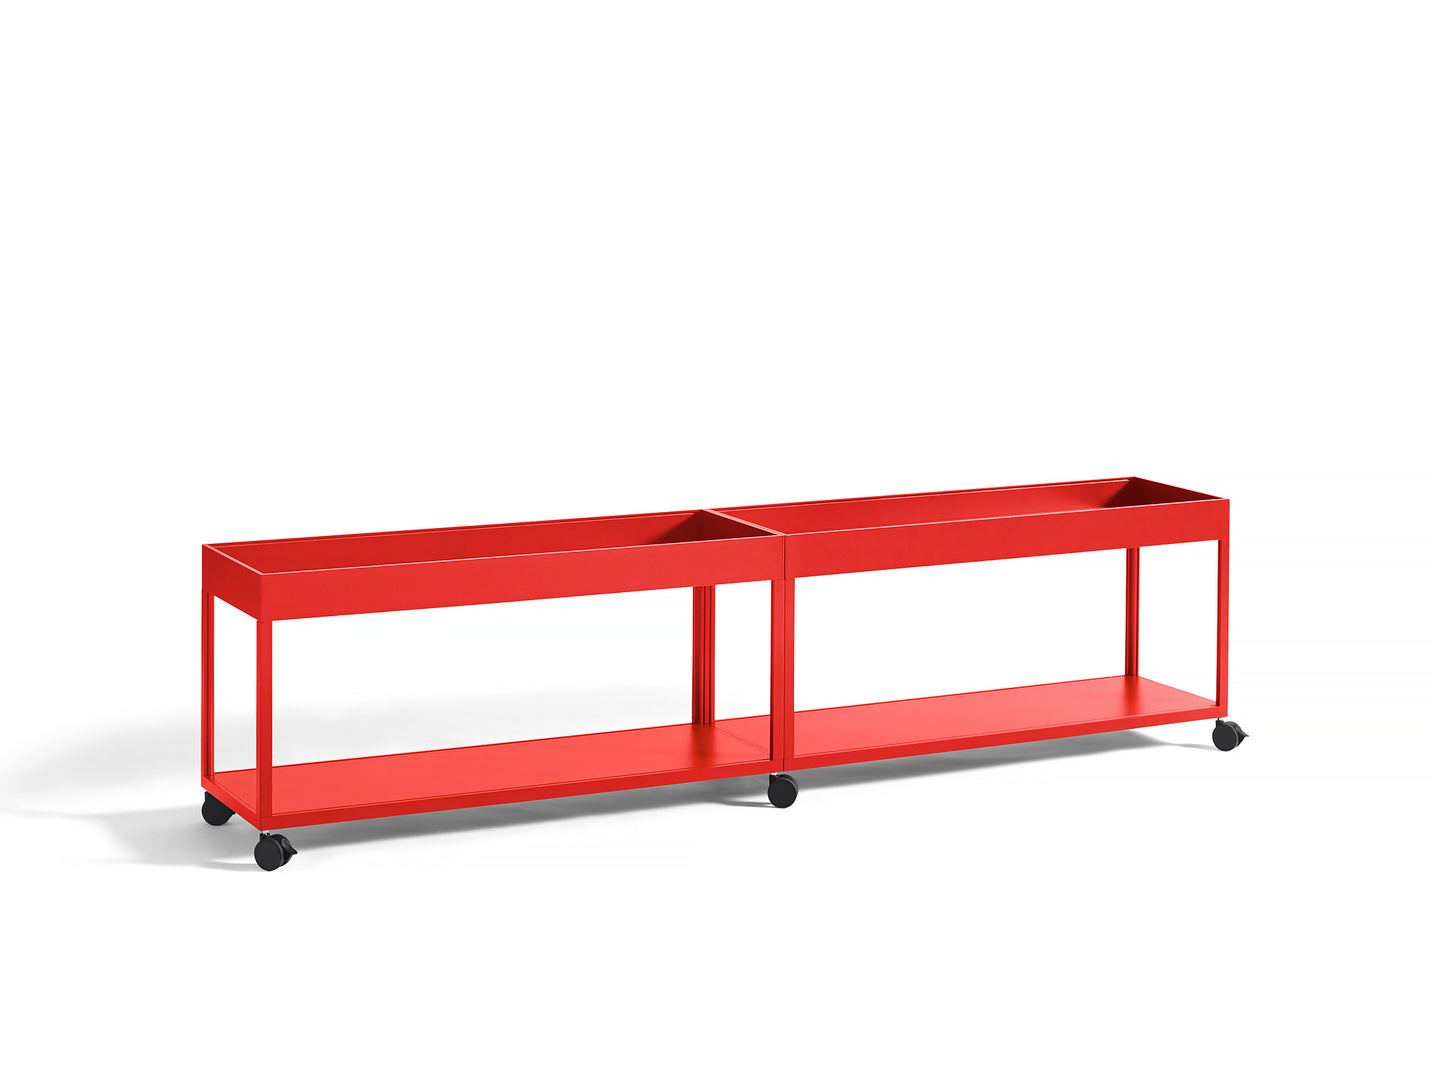 New Order Shelving - Combination 103, 2 Layers in Red